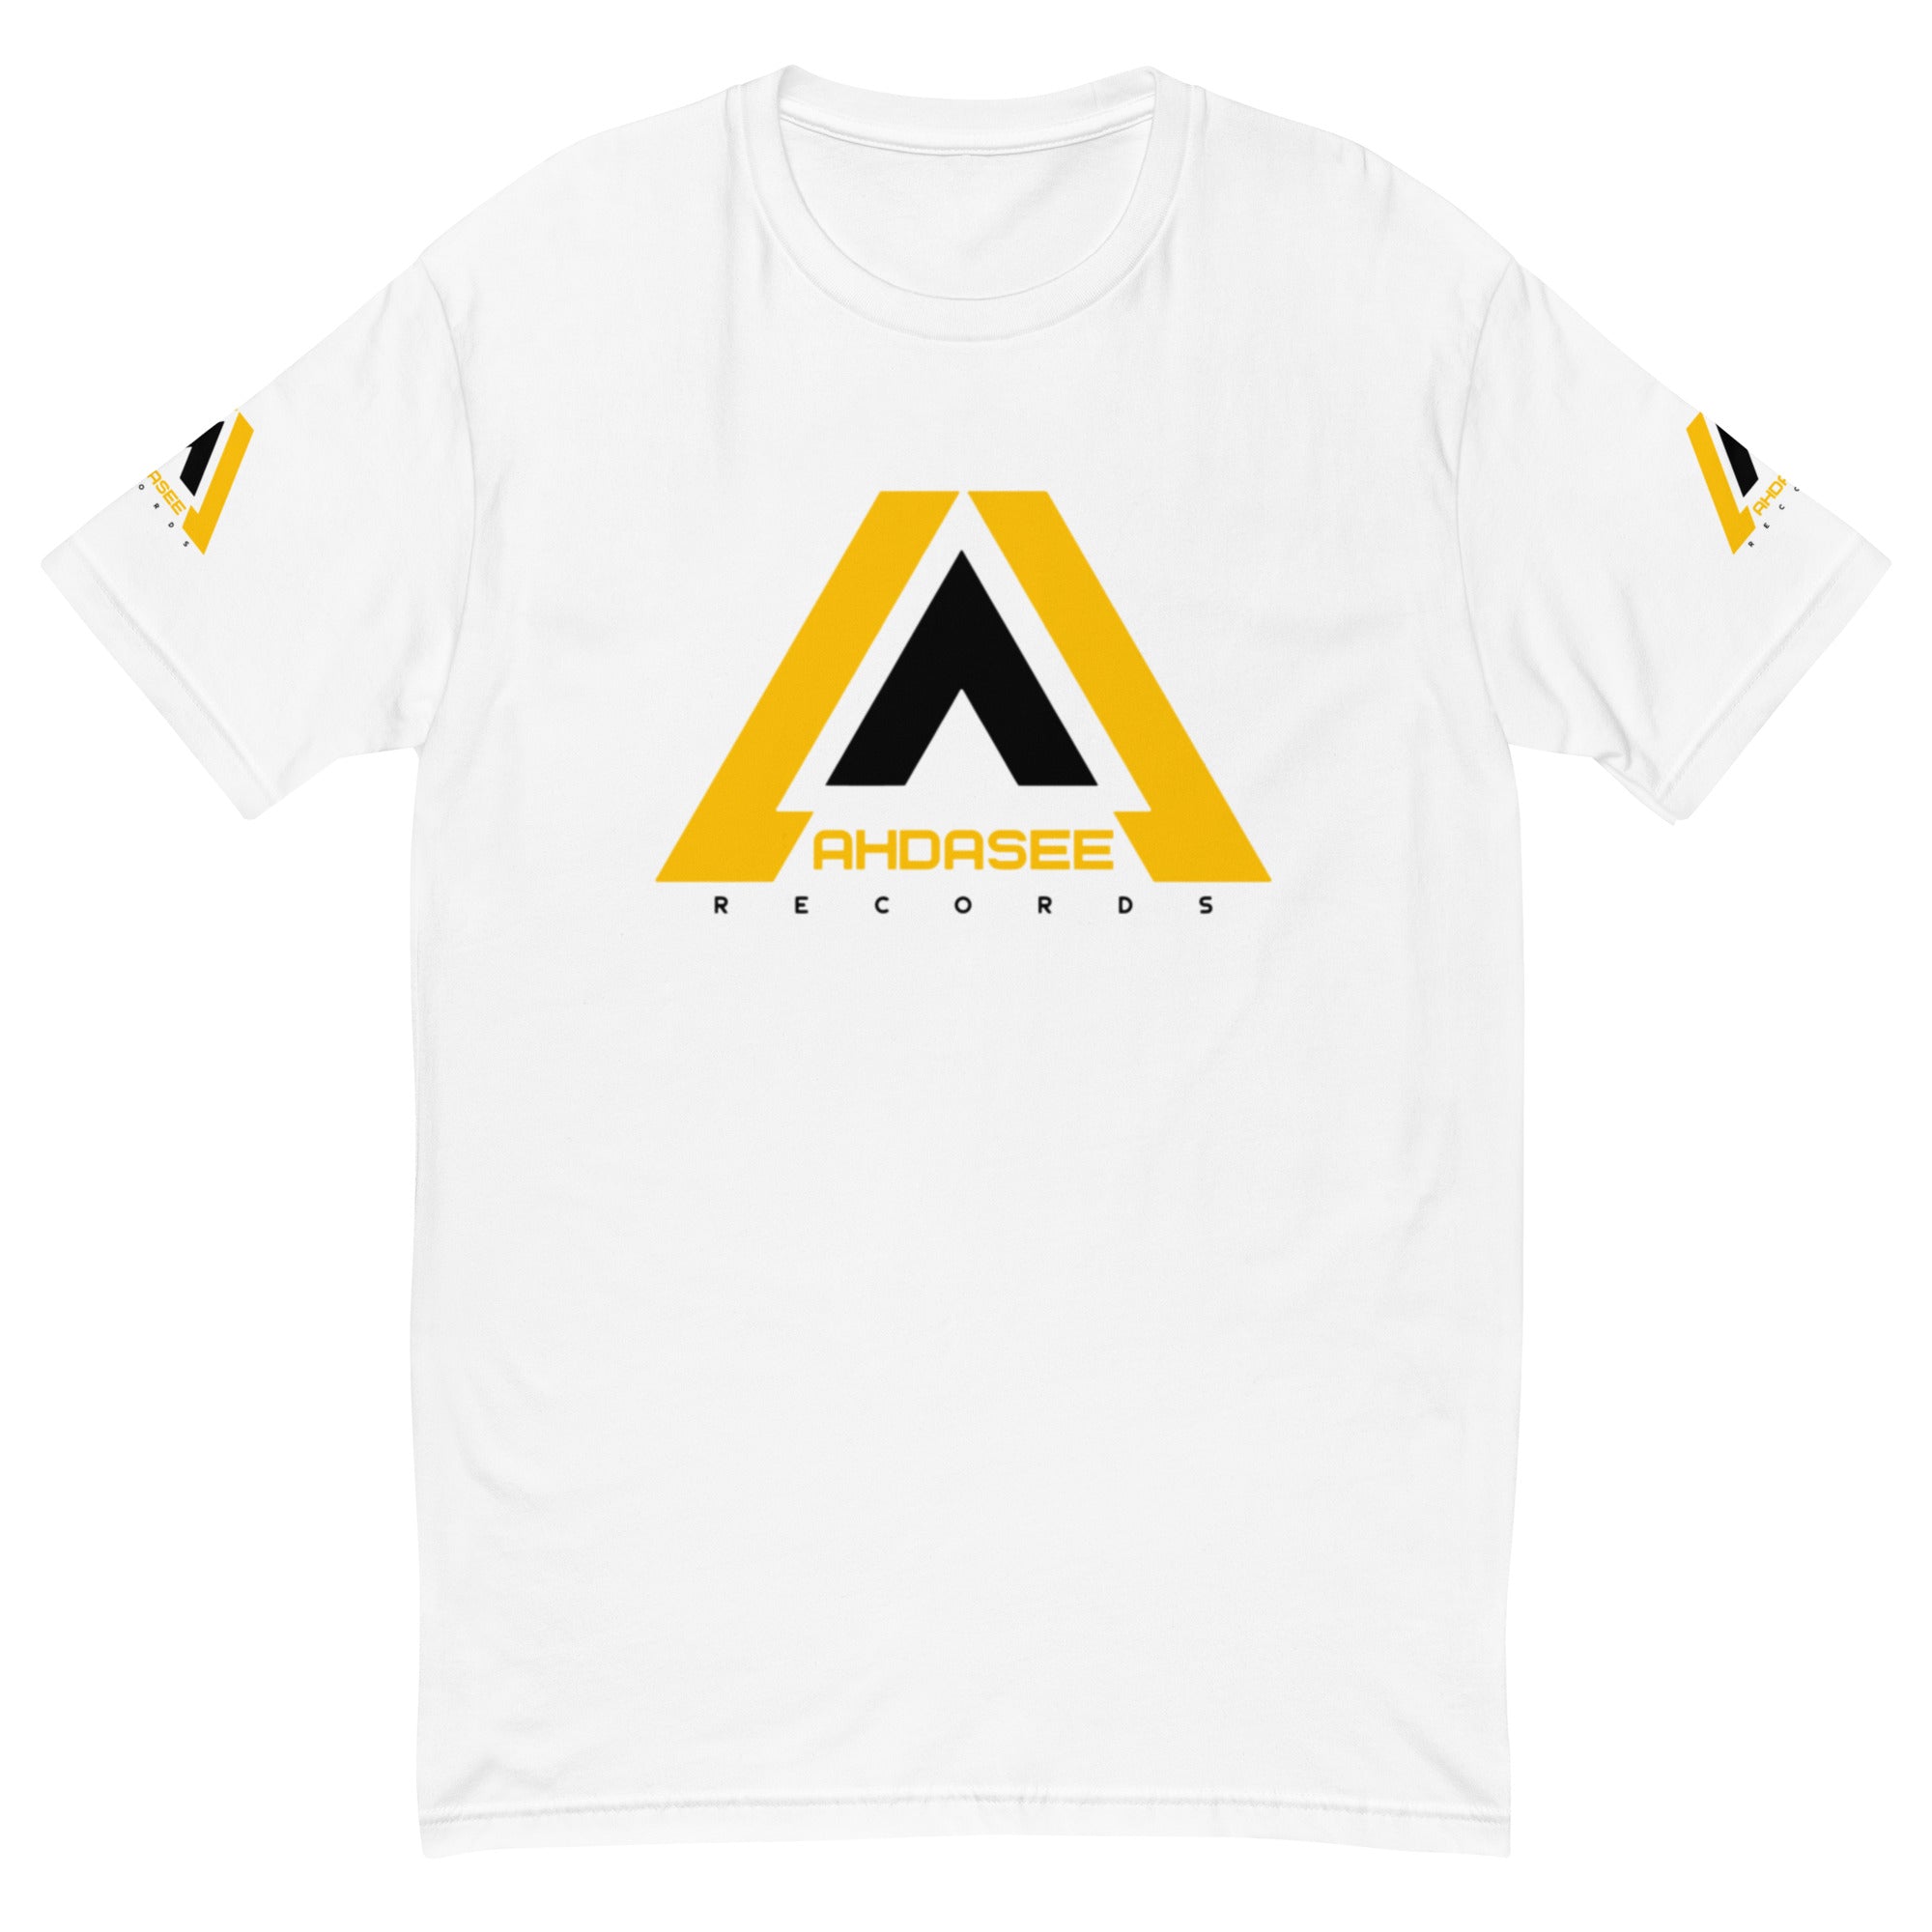 Ahdasee T-Shirt (White, Black, and Yellow)